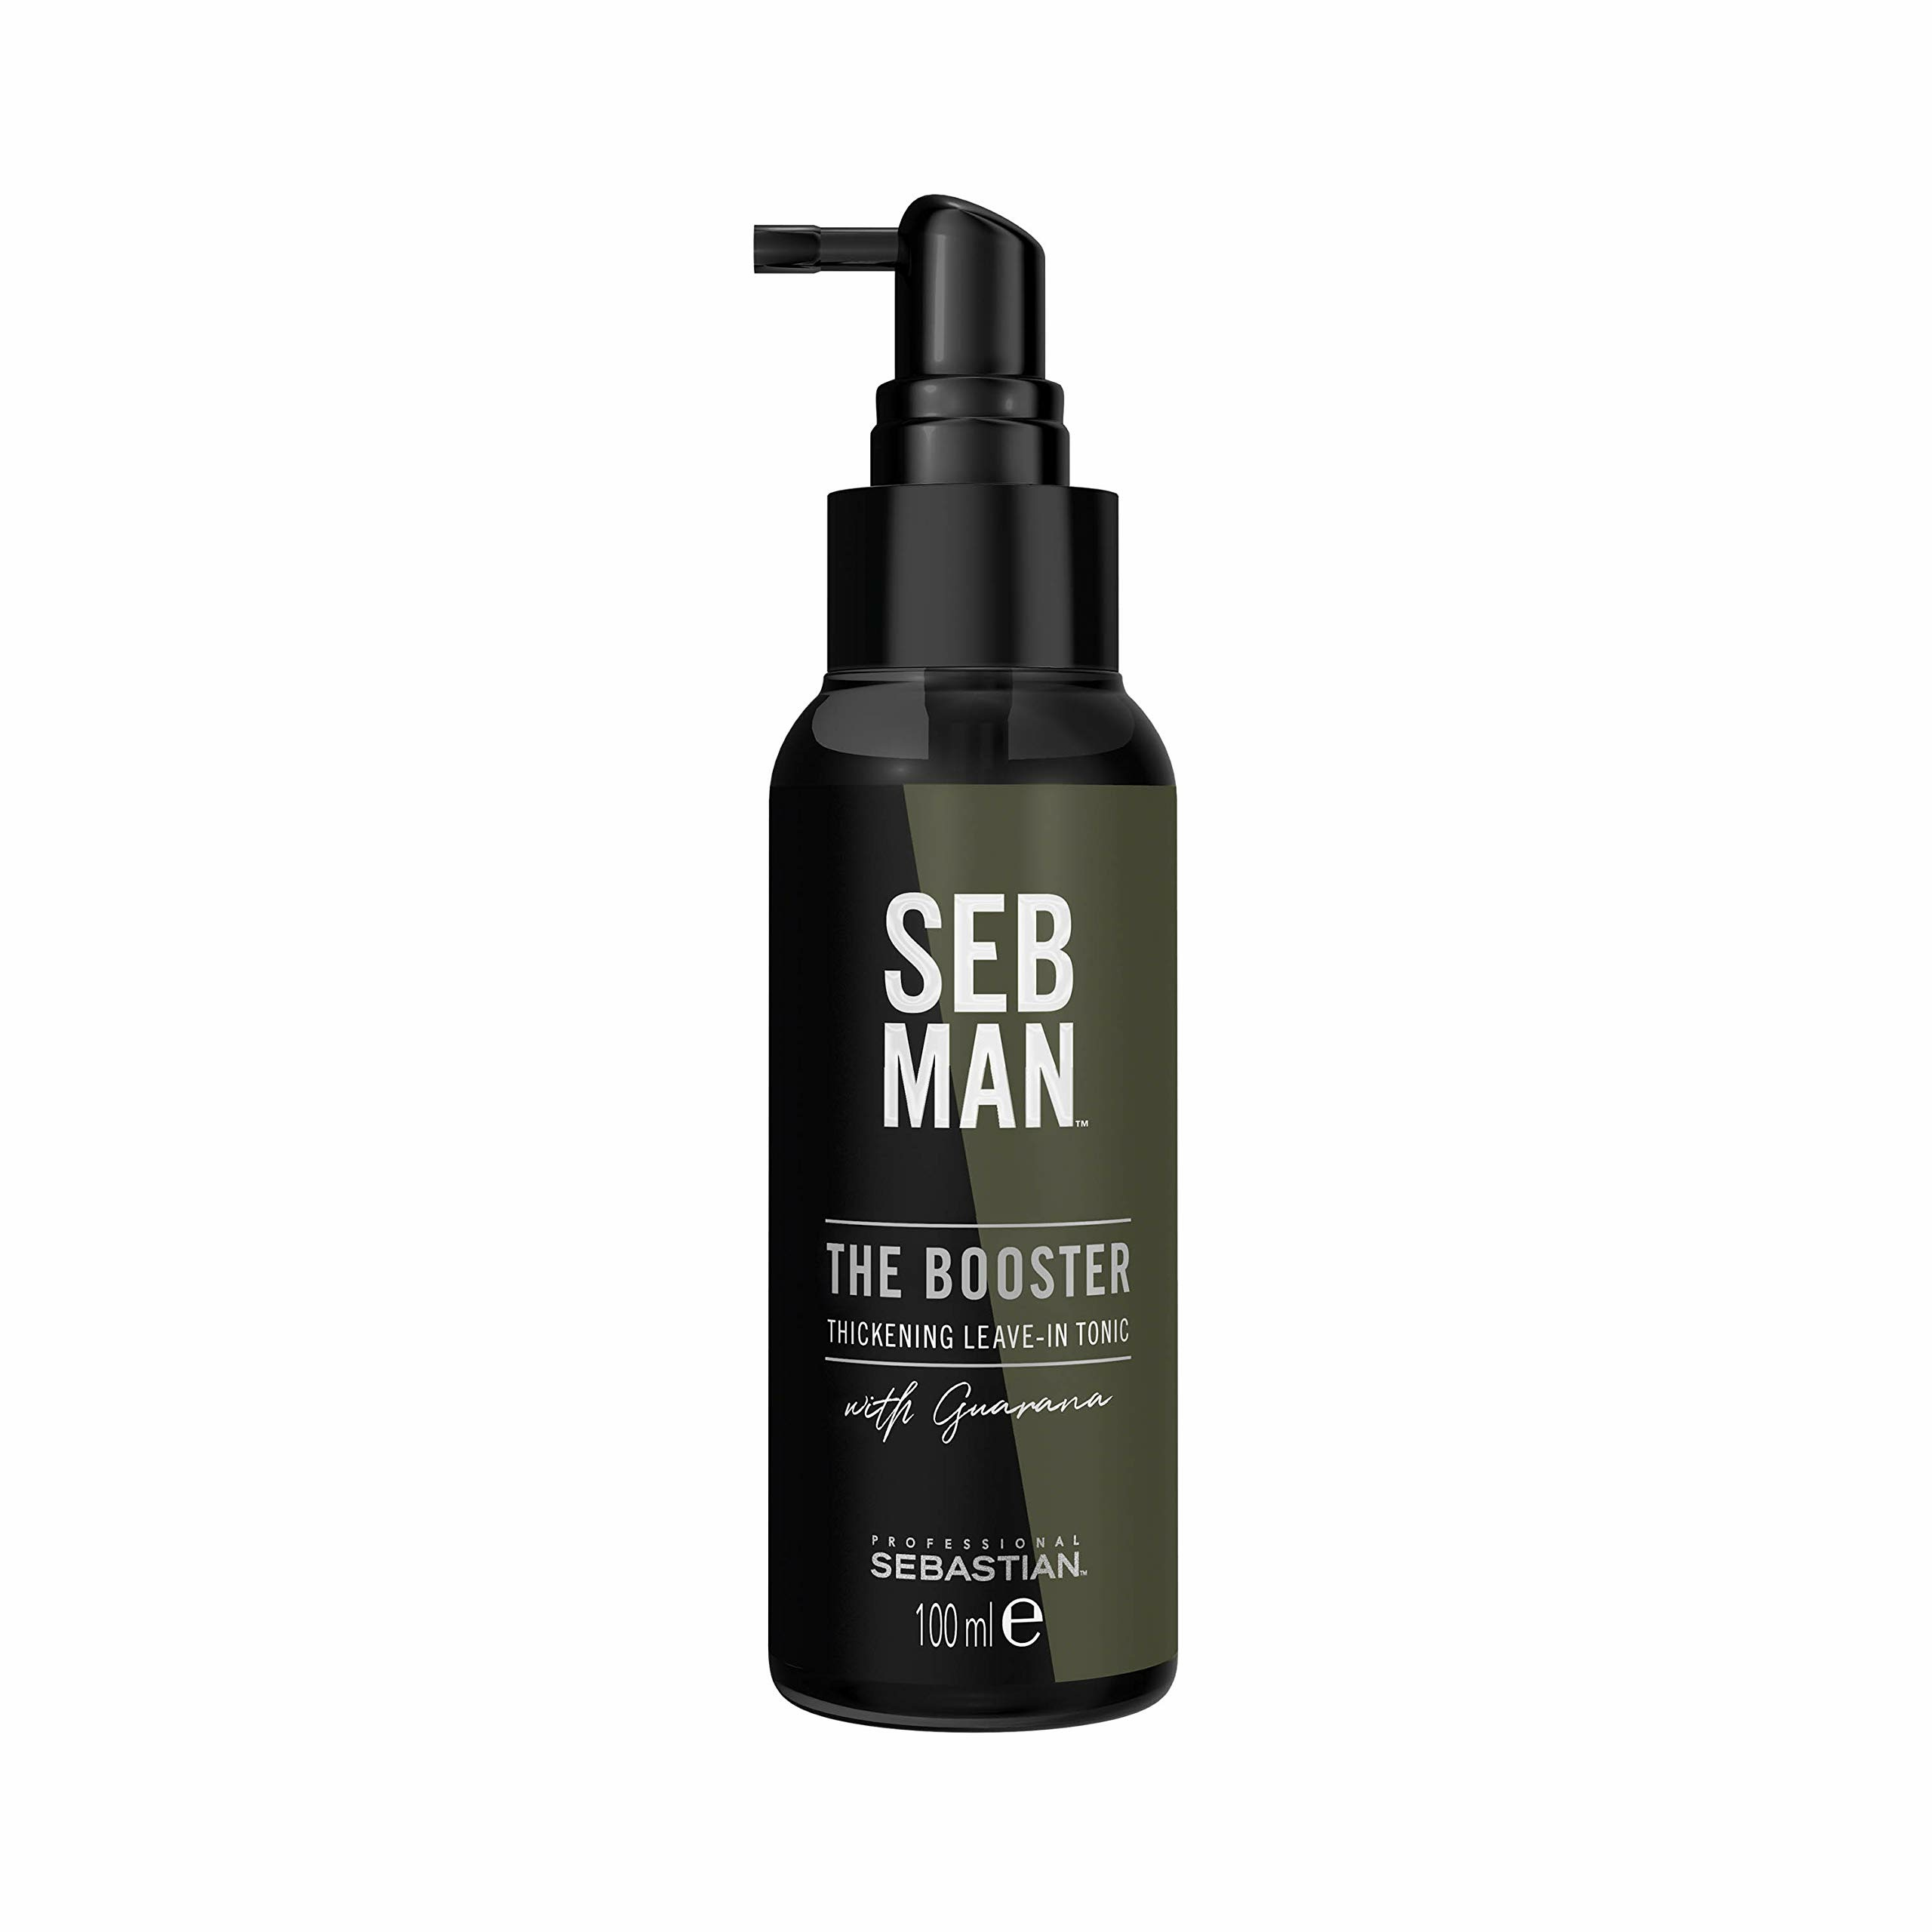 SEB MAN The Booster Leave-In Tonic 100ml